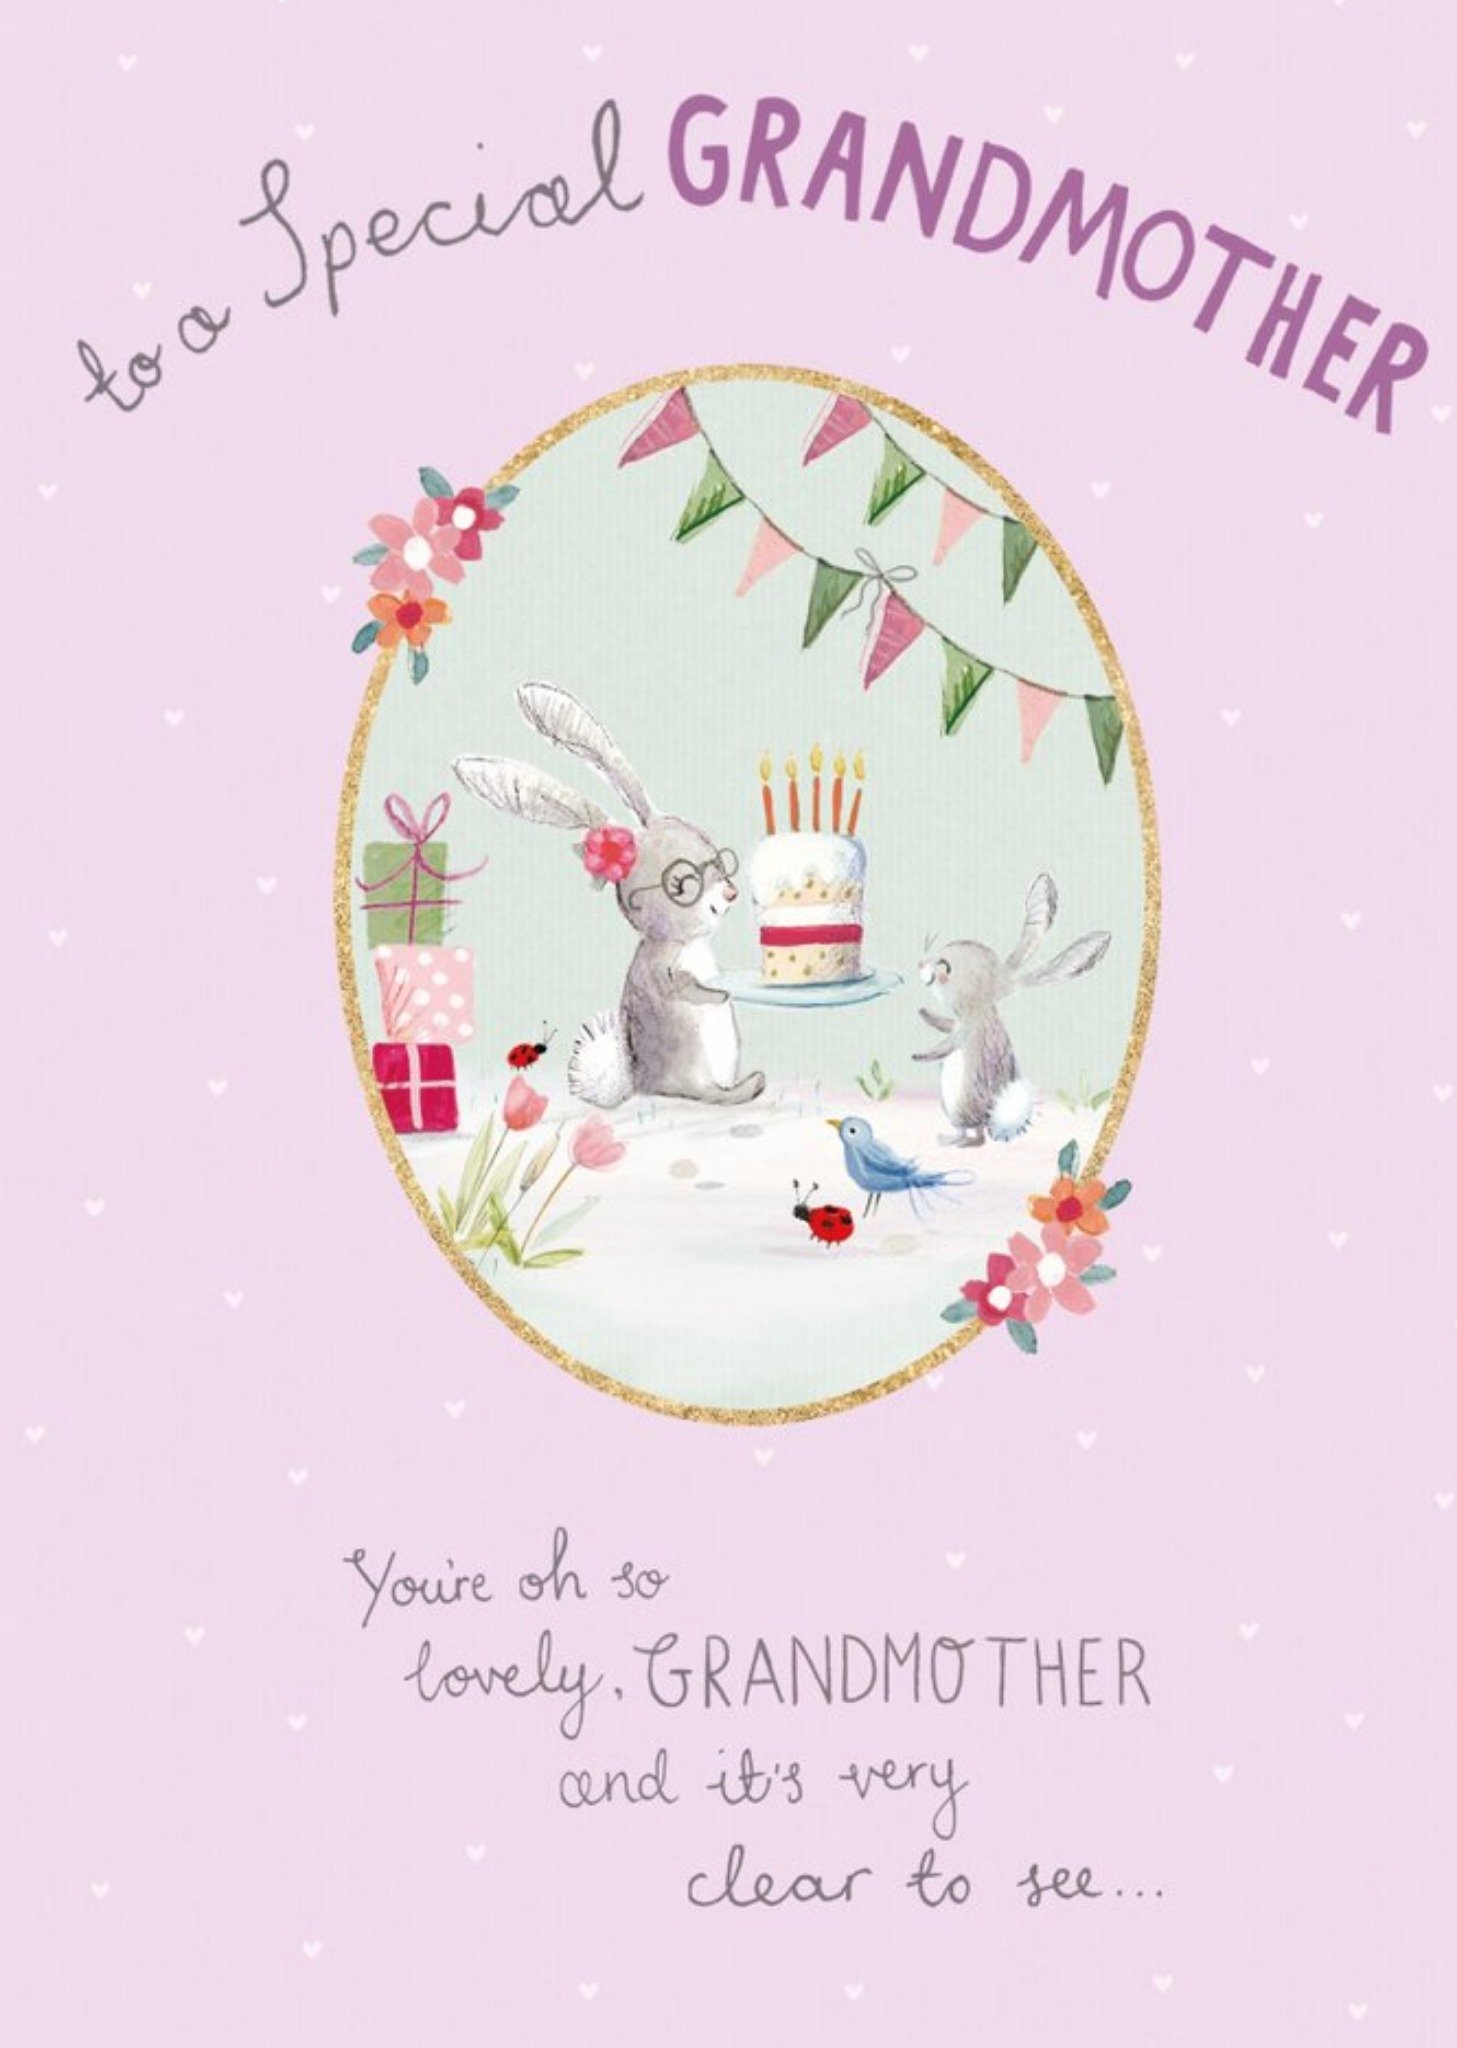 Moonpig Cute Bunny Illustrations To A Special Grandmother Birthday Card, Large